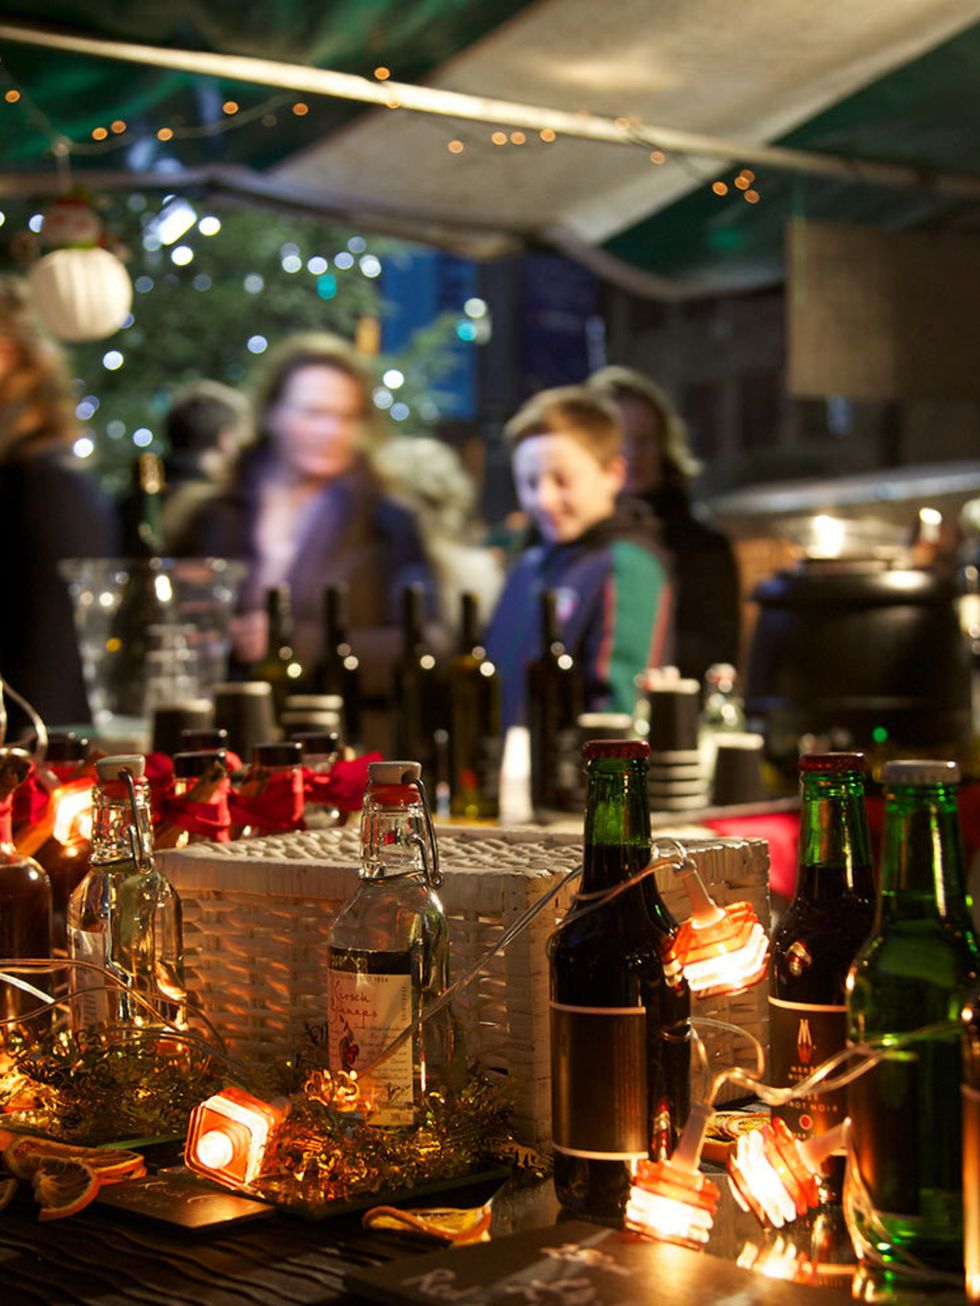 <p><strong>FOOD: Real Food Christmas Market </strong></p>

<p>Stock up your Christmas pantry with sustainably and ethically produced fine foods at the Real Food Christmas Market at the Southbank Centre&#39;s Winter Festival with NatWest. This five-day mar